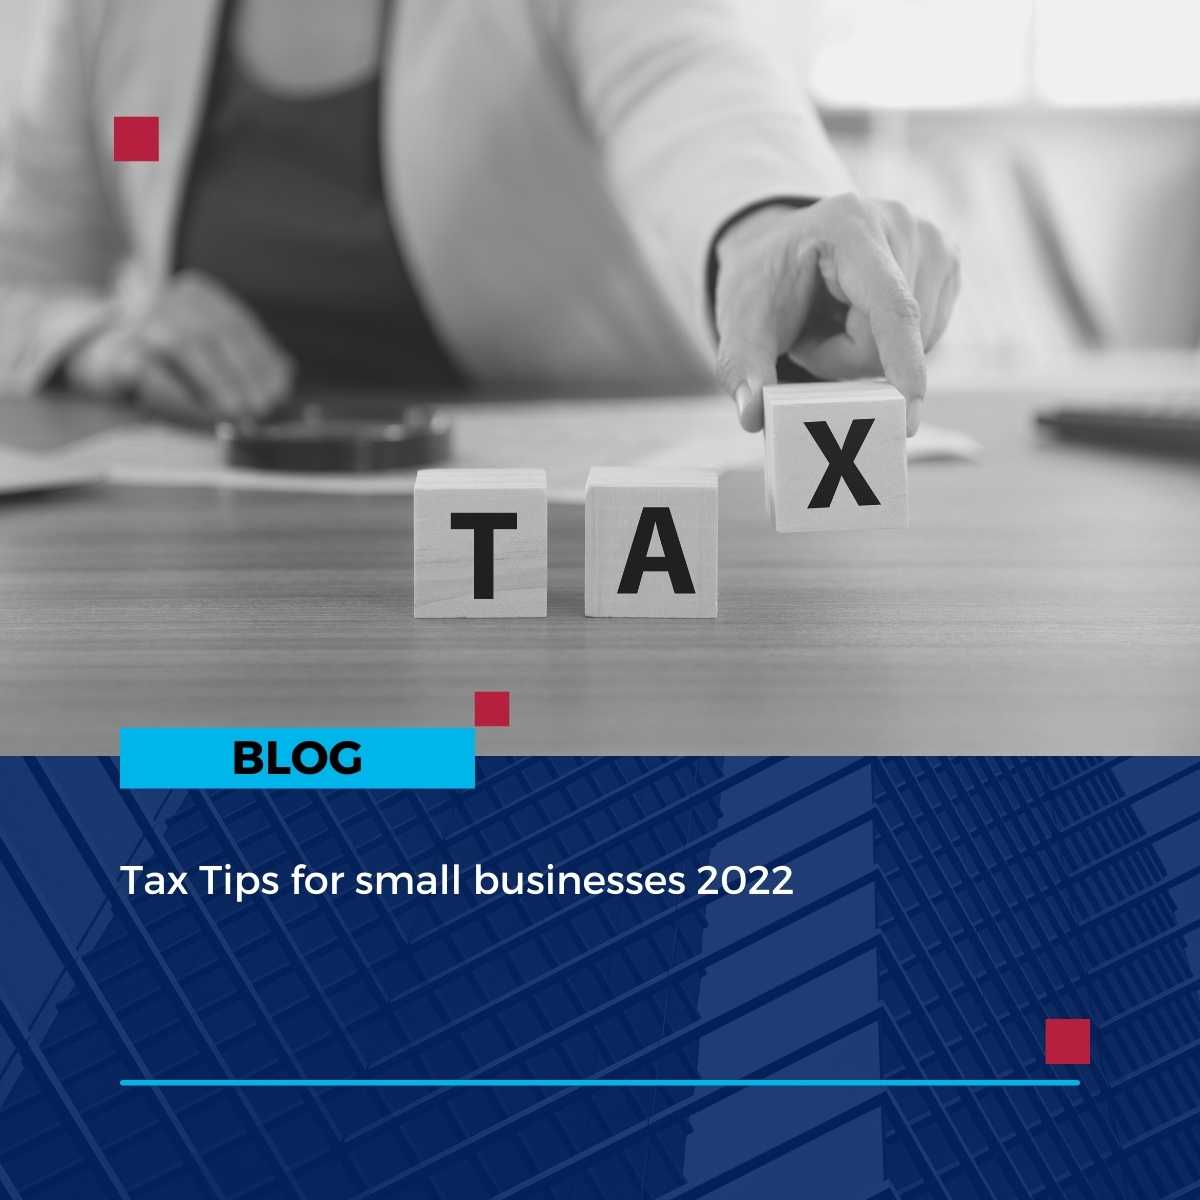 Tax Tips for small businesses 2022